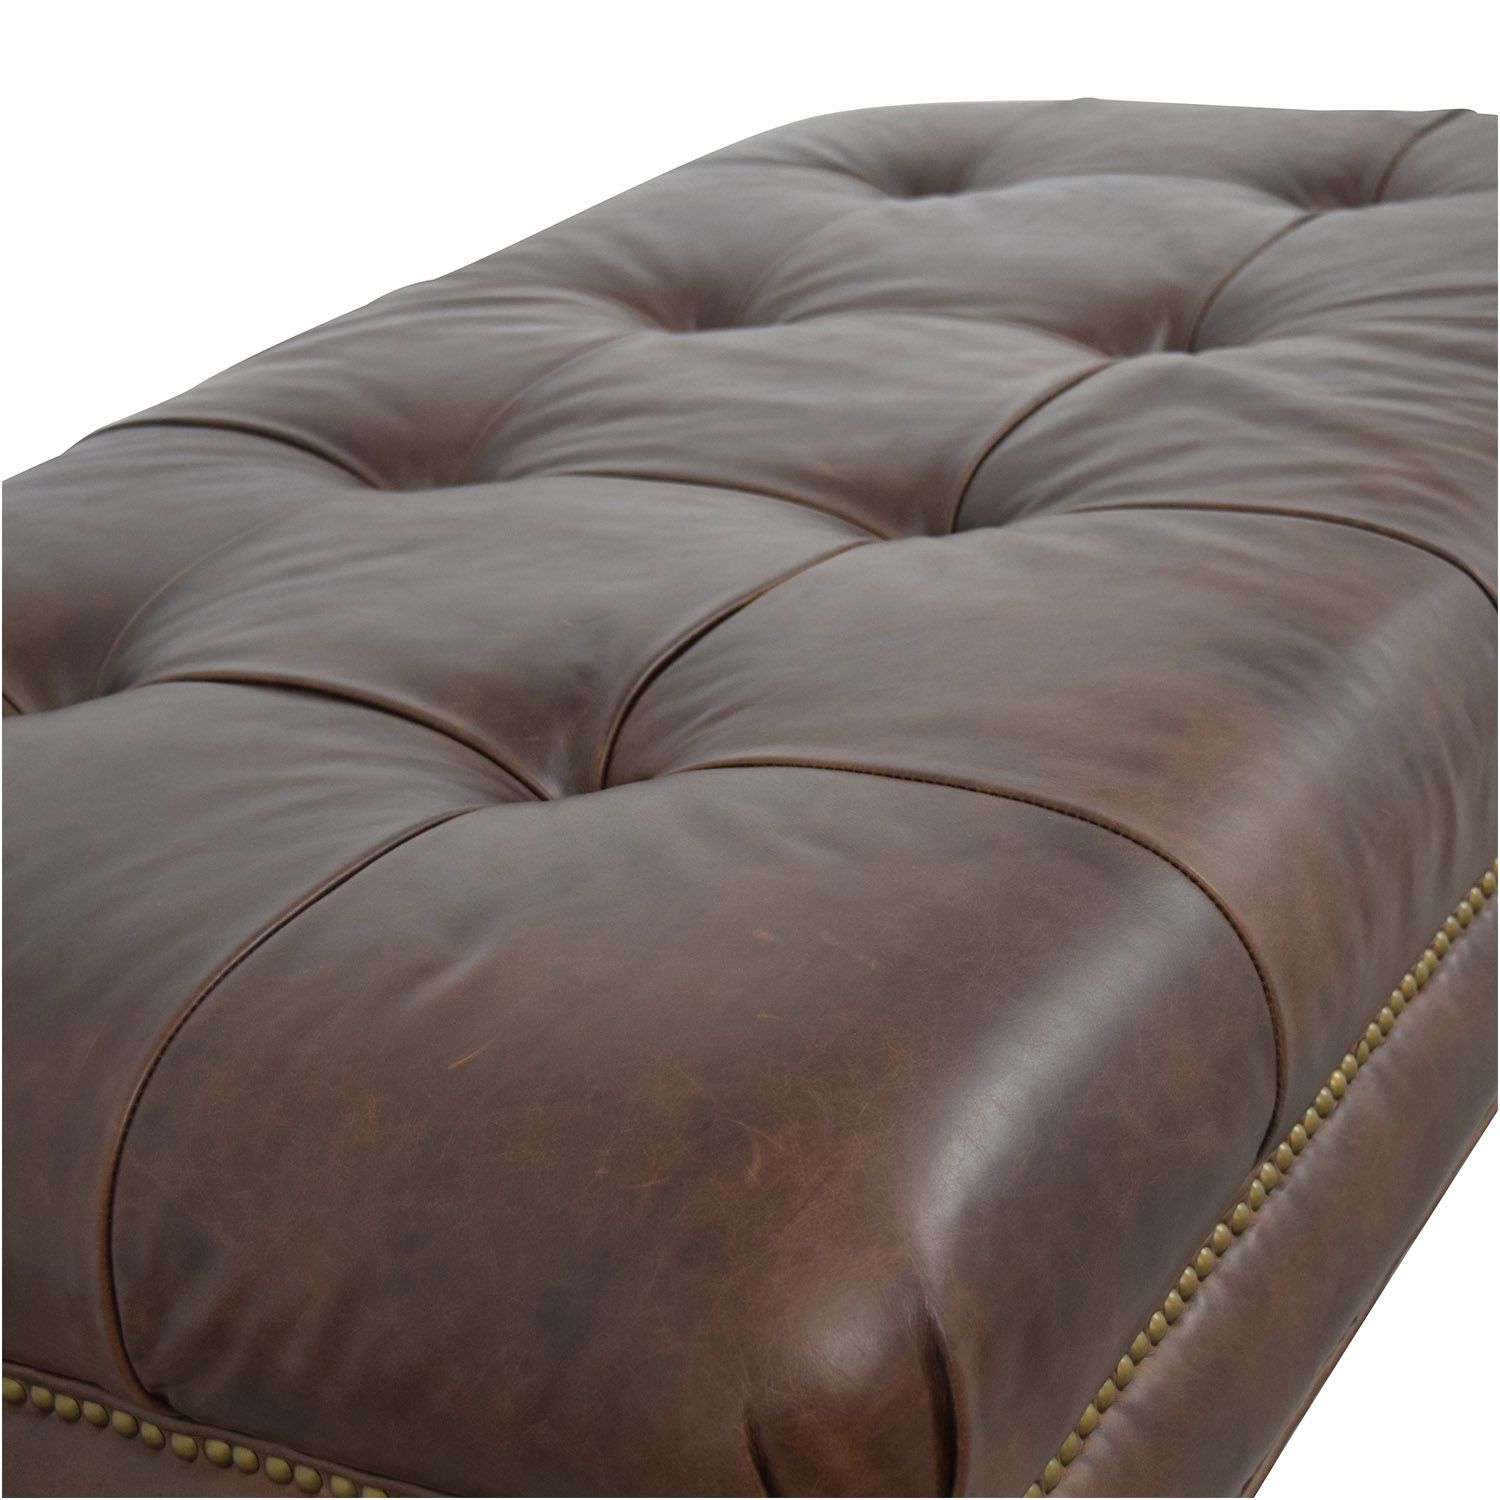 74% Off – Pottery Barn Pottery Barn Martin Tufted Brown Leather Ottoman With Brown Tufted Pouf Ottomans (View 3 of 20)